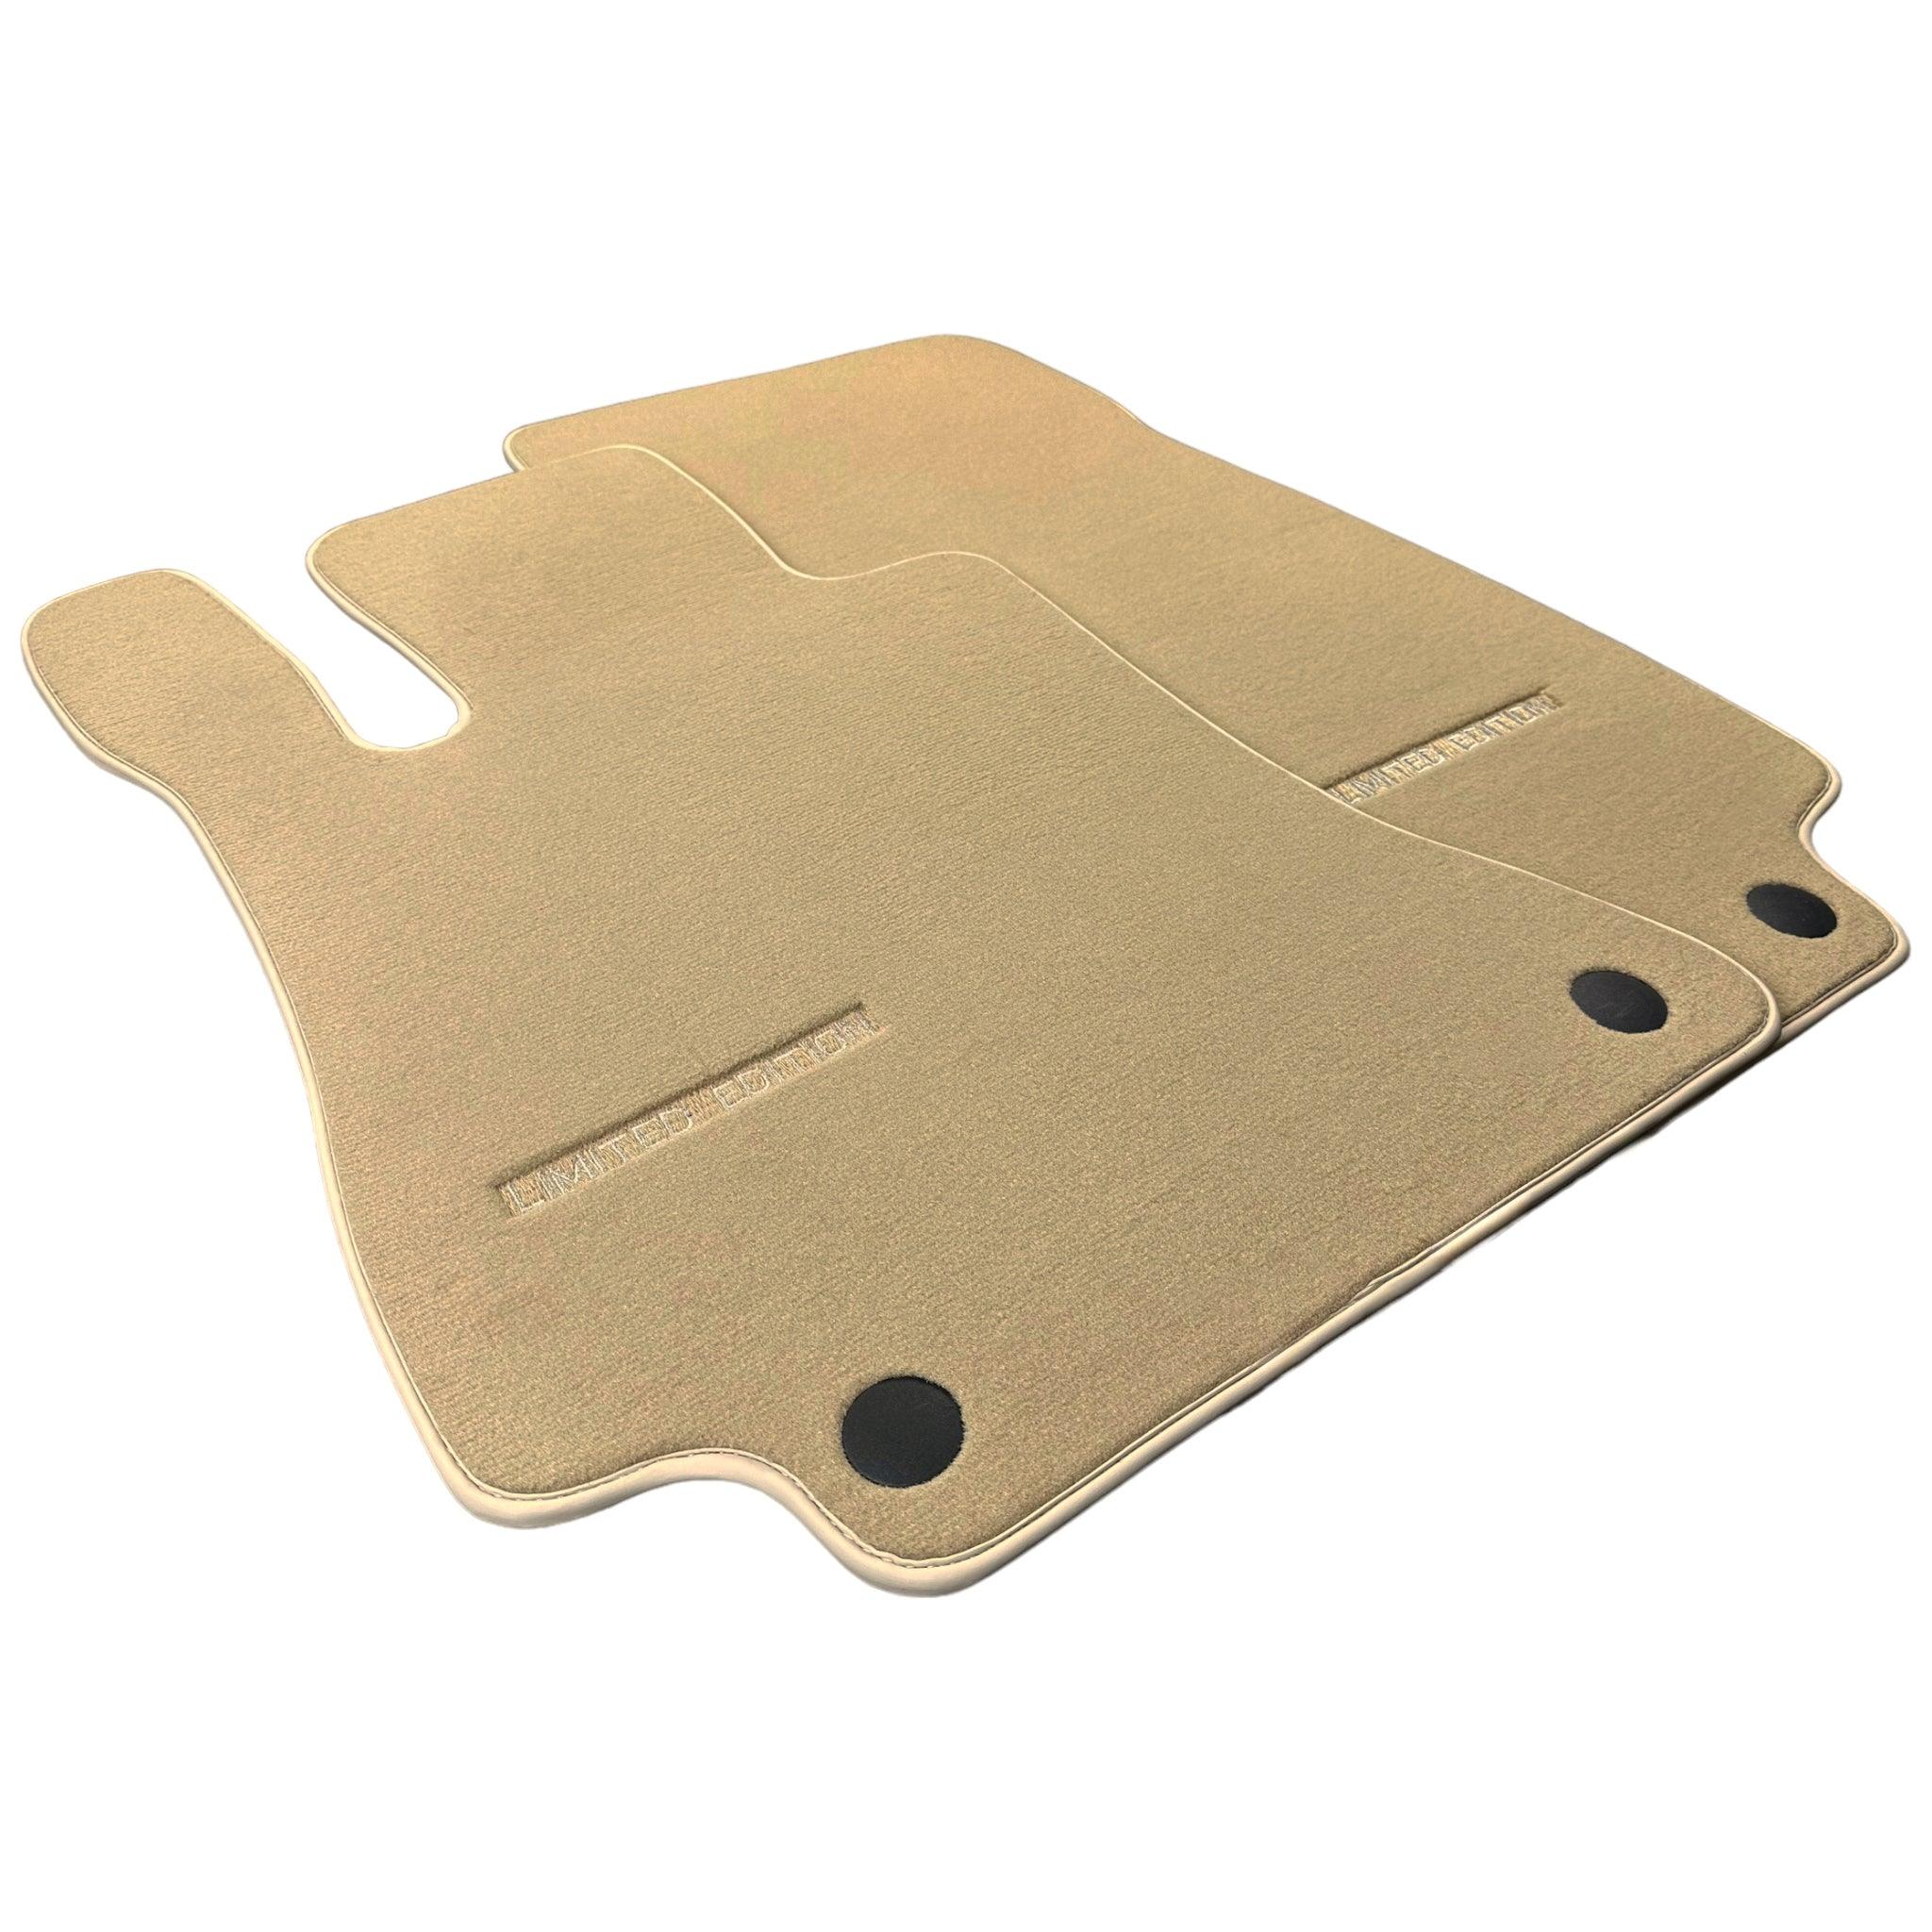 Beige Floor Mats For Mercedes Benz S-Class W140 (1991-1998) | Limited Edition